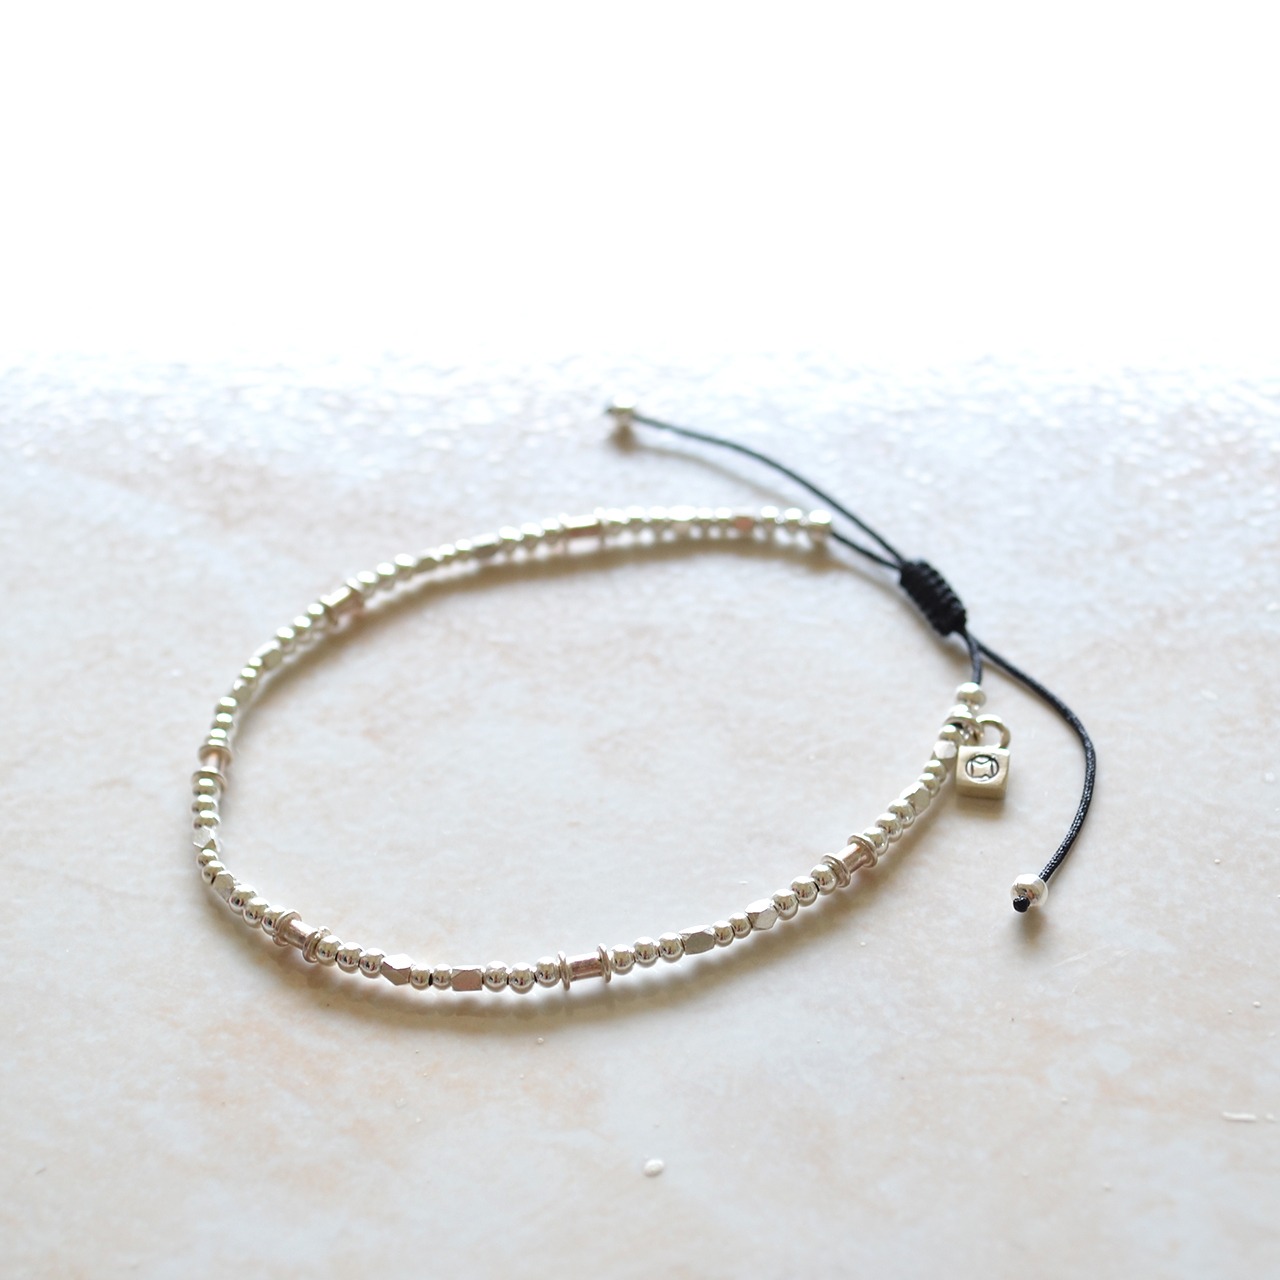 Mix Beads Bracelet with Cord (メンズ)